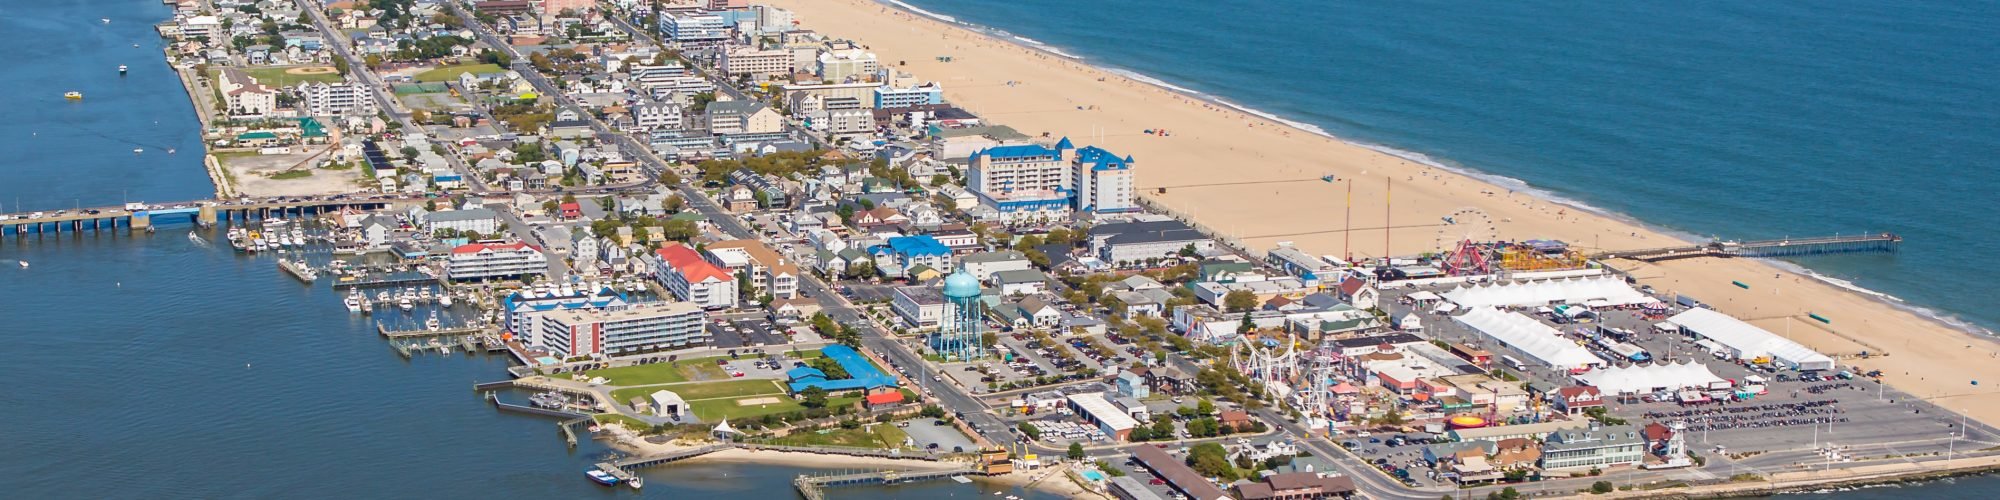 How much money does ocean city md make a year?